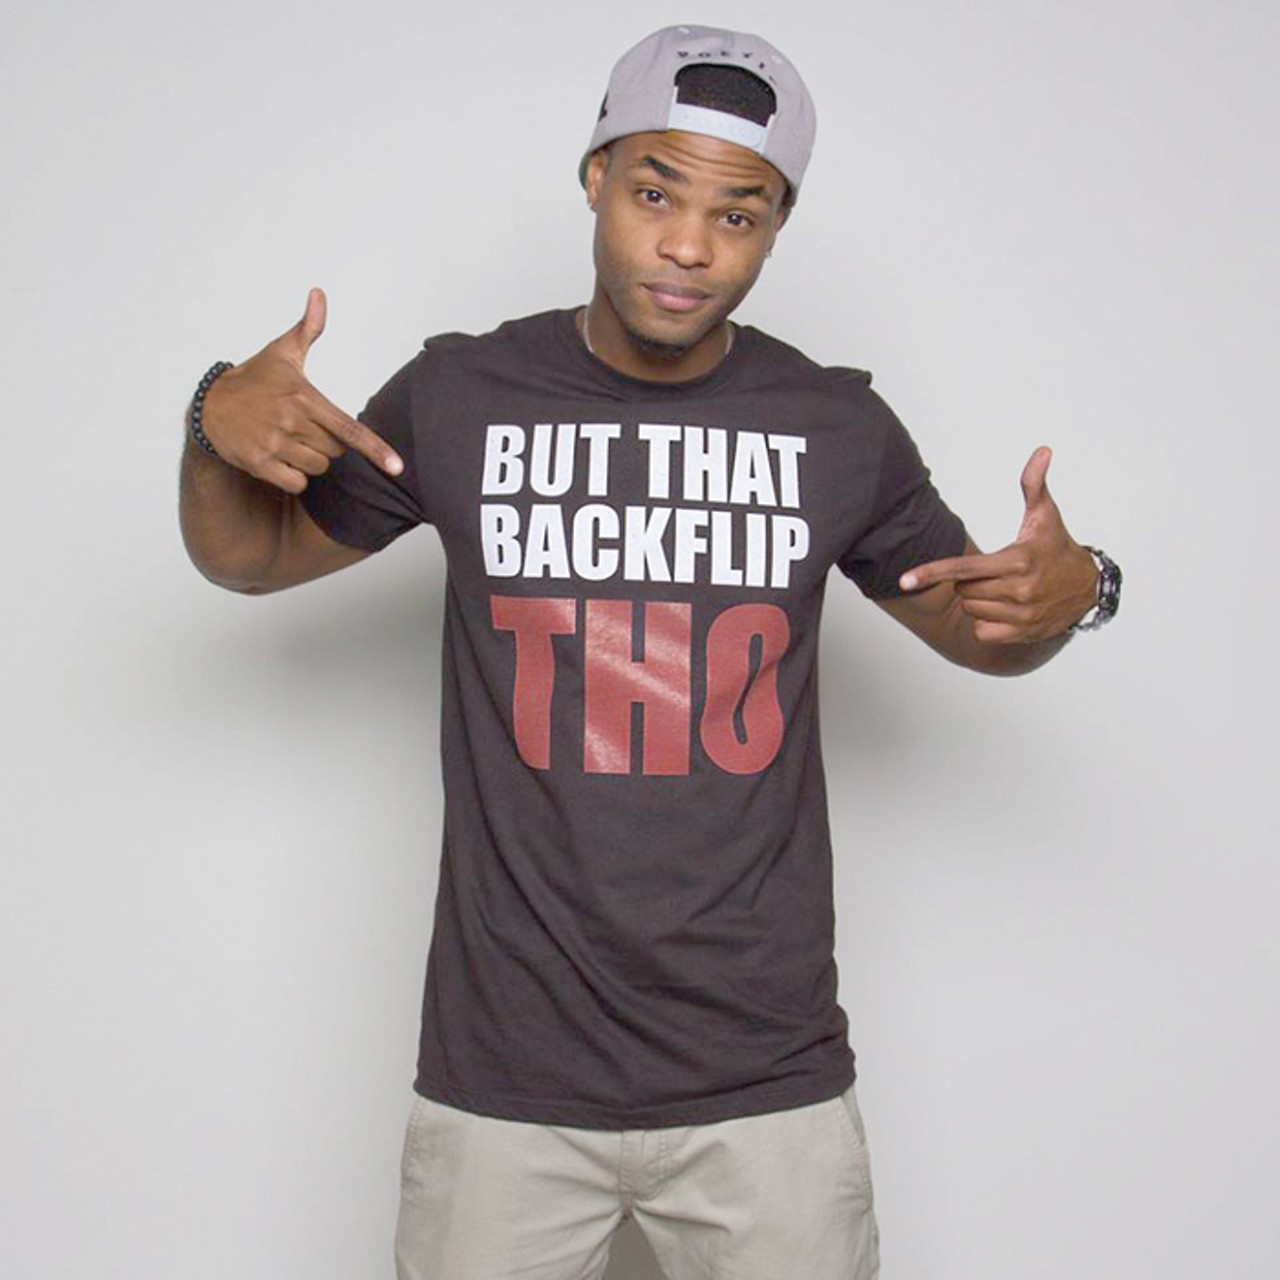 SATURDAY, 15
King Bach
Who knew a social media app with only six seconds of recording would land someone into celebrity status? If you’re not familiar with Vine, it is one of the best apps to download in 2013 and Andrew Bachelor, aka King Bach, took advantage of it. With his six-second videos, countless back flips that coined the phrase “But that backflip though,” and 4.7 million fans, he’s taking it all to the stage at The Crofoot Ballroom with a show that will either leave you with a pain in your side from laughter or wanting to make videos of your own hoping for the same success. Tickets start at $25, doors open at 7 p.m.